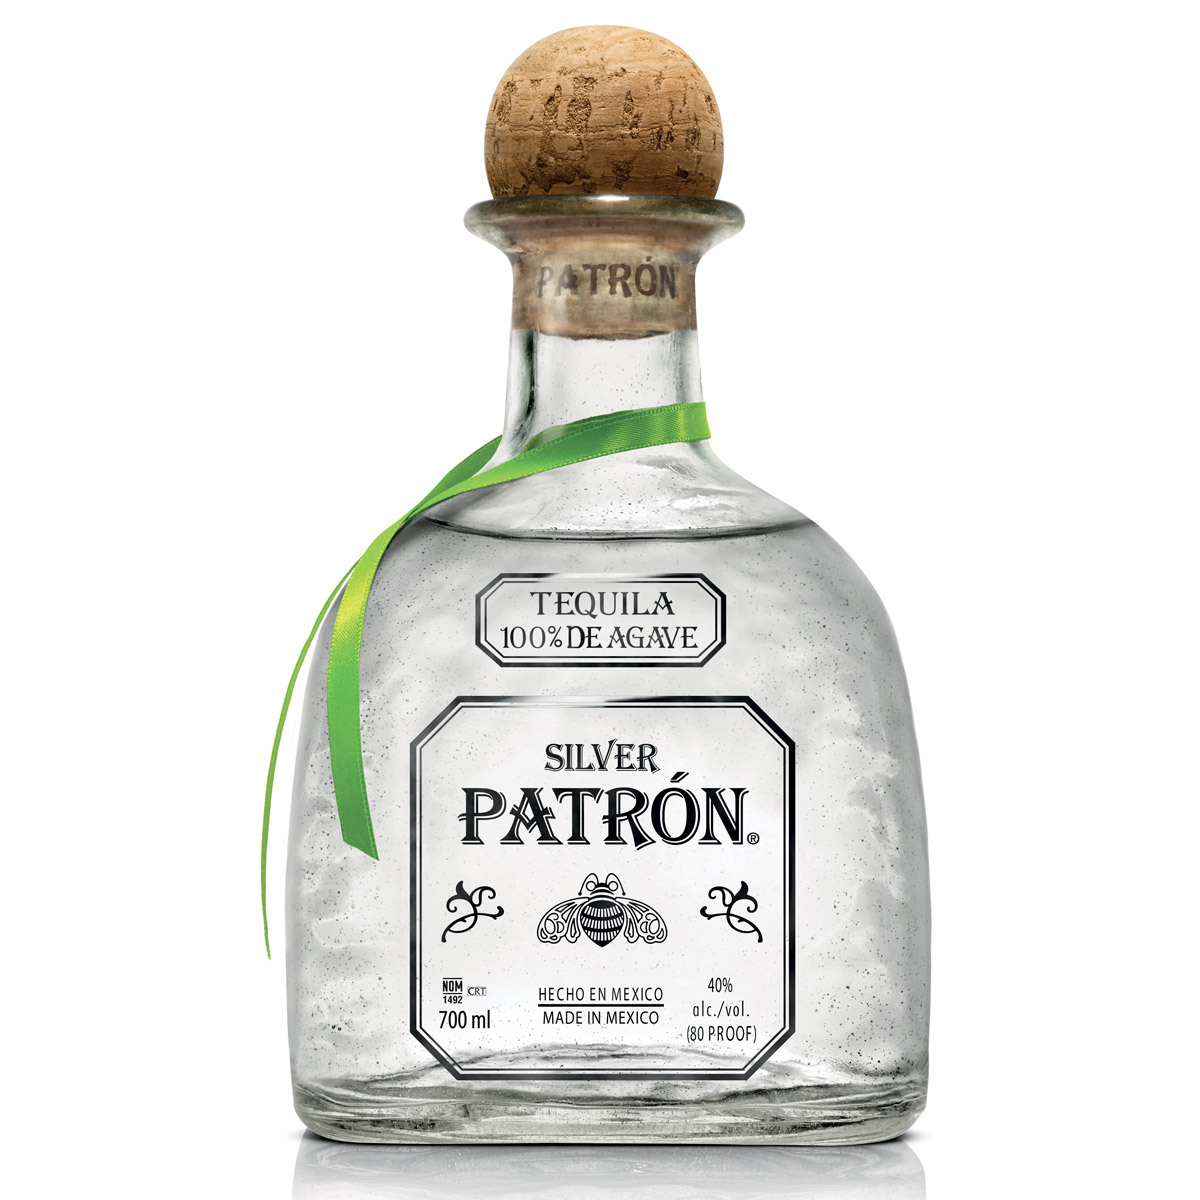 Costco Patron Tequila Price - How do you Price a Switches?